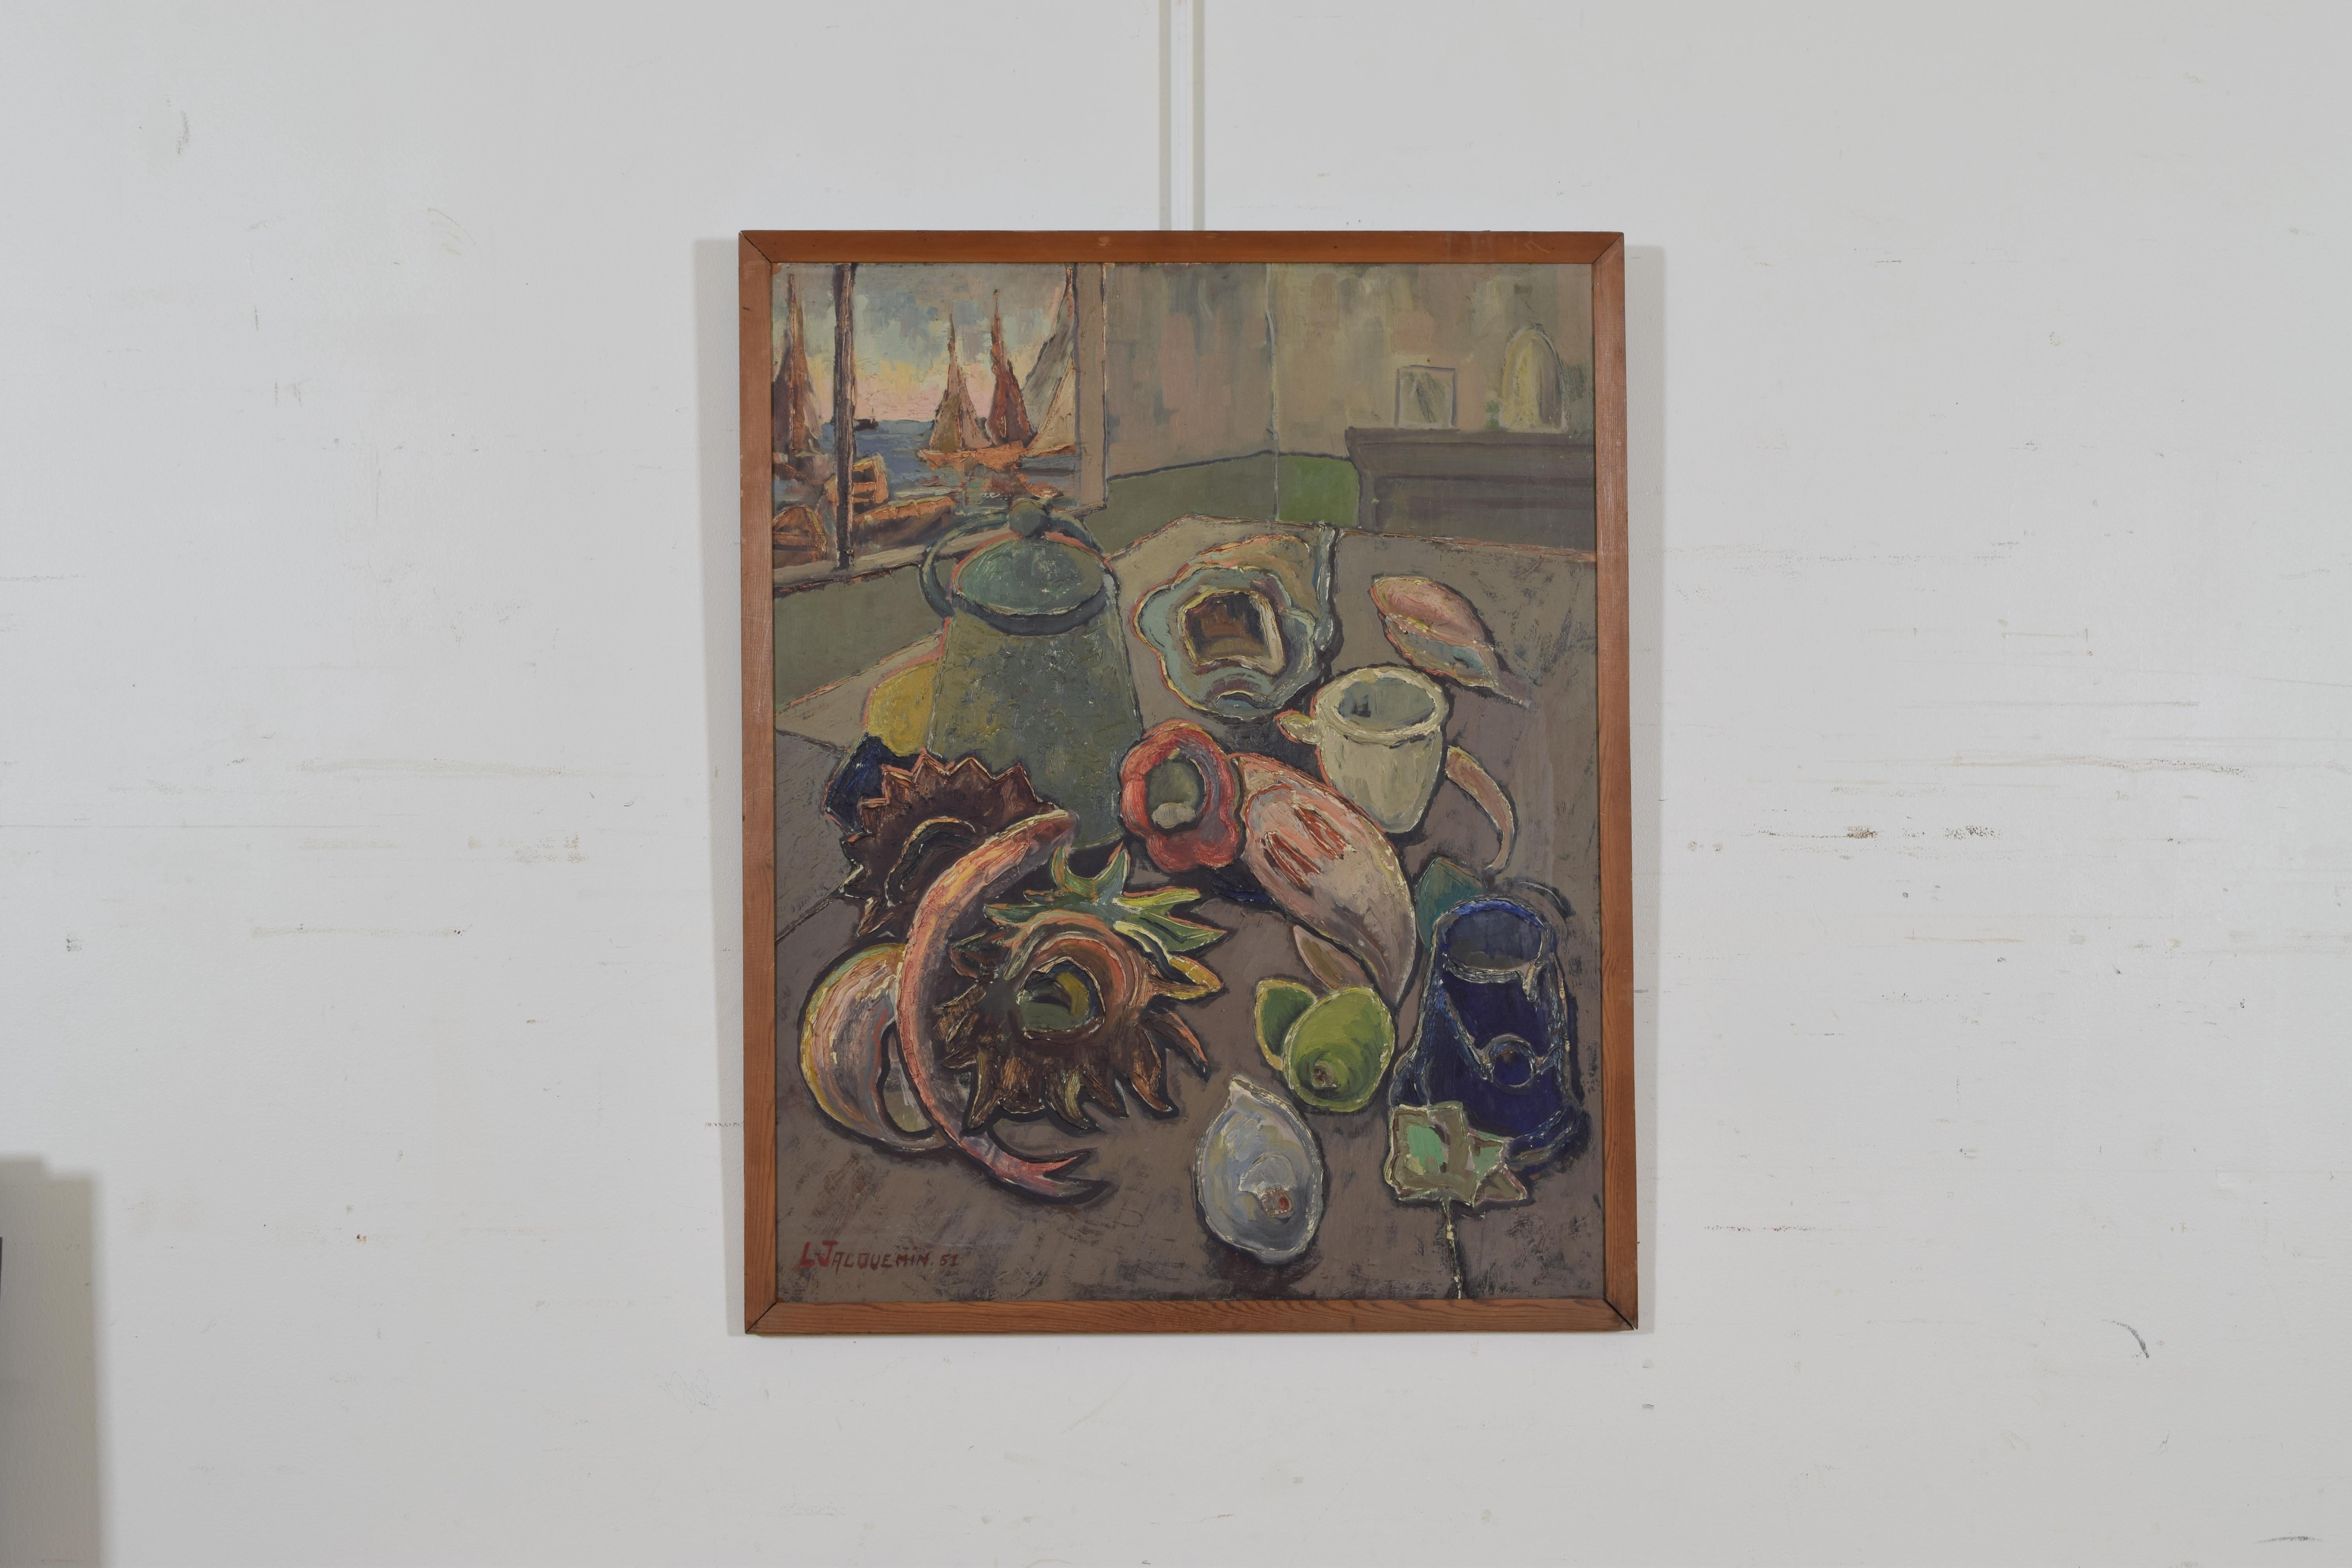 This lovely painting depicting a kitchen scene with typical accoutrement and the bounty of the sea, the hidden gem being the harbor outside the window, in simple wooden frame.